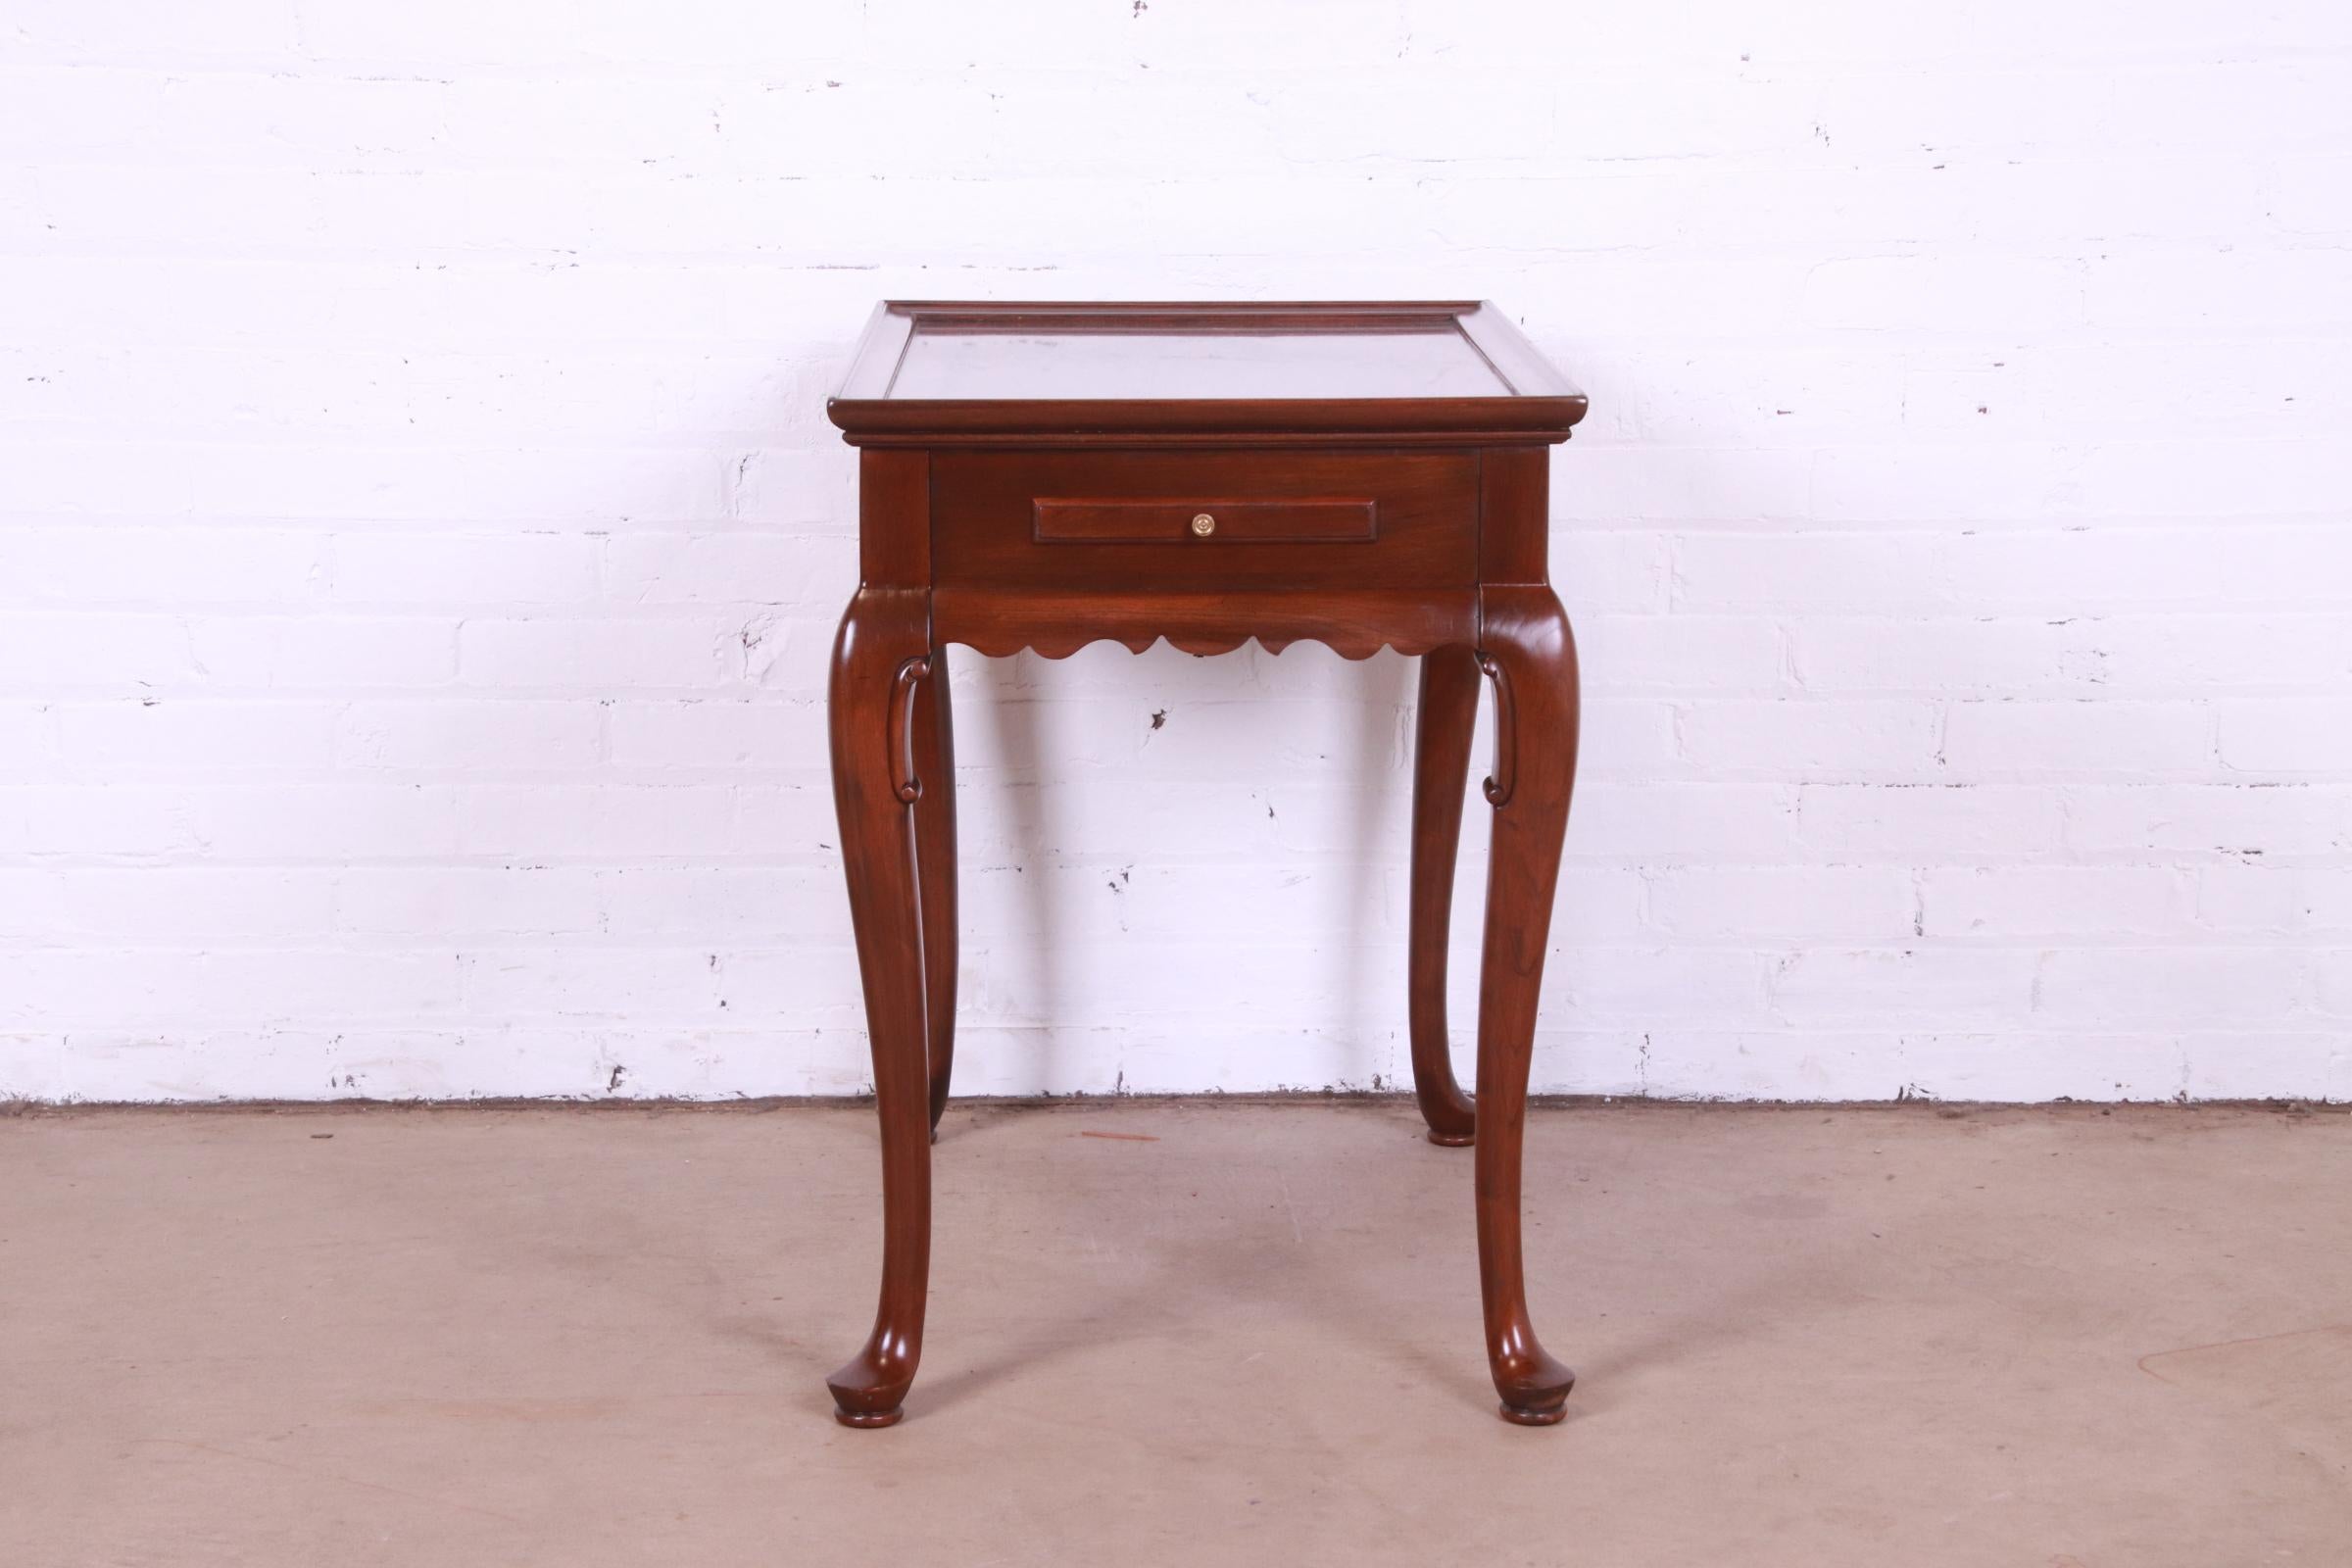 American Ethan Allen Queen Anne Cherry Wood Tea Table or Occasional Side Table